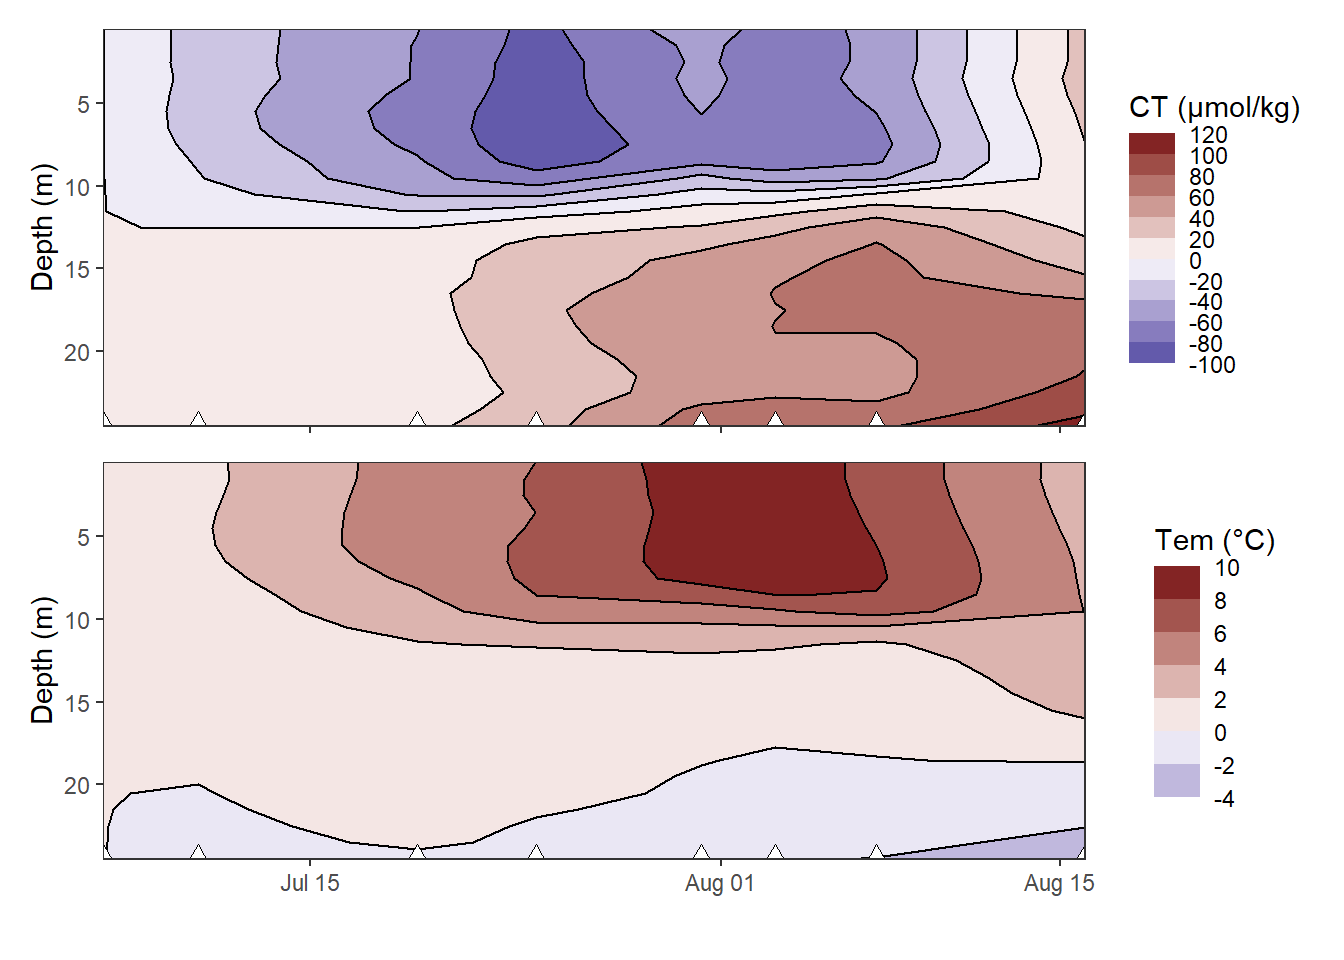 Hovmoeller plots of cumulative changes in C~T~ and temperature.